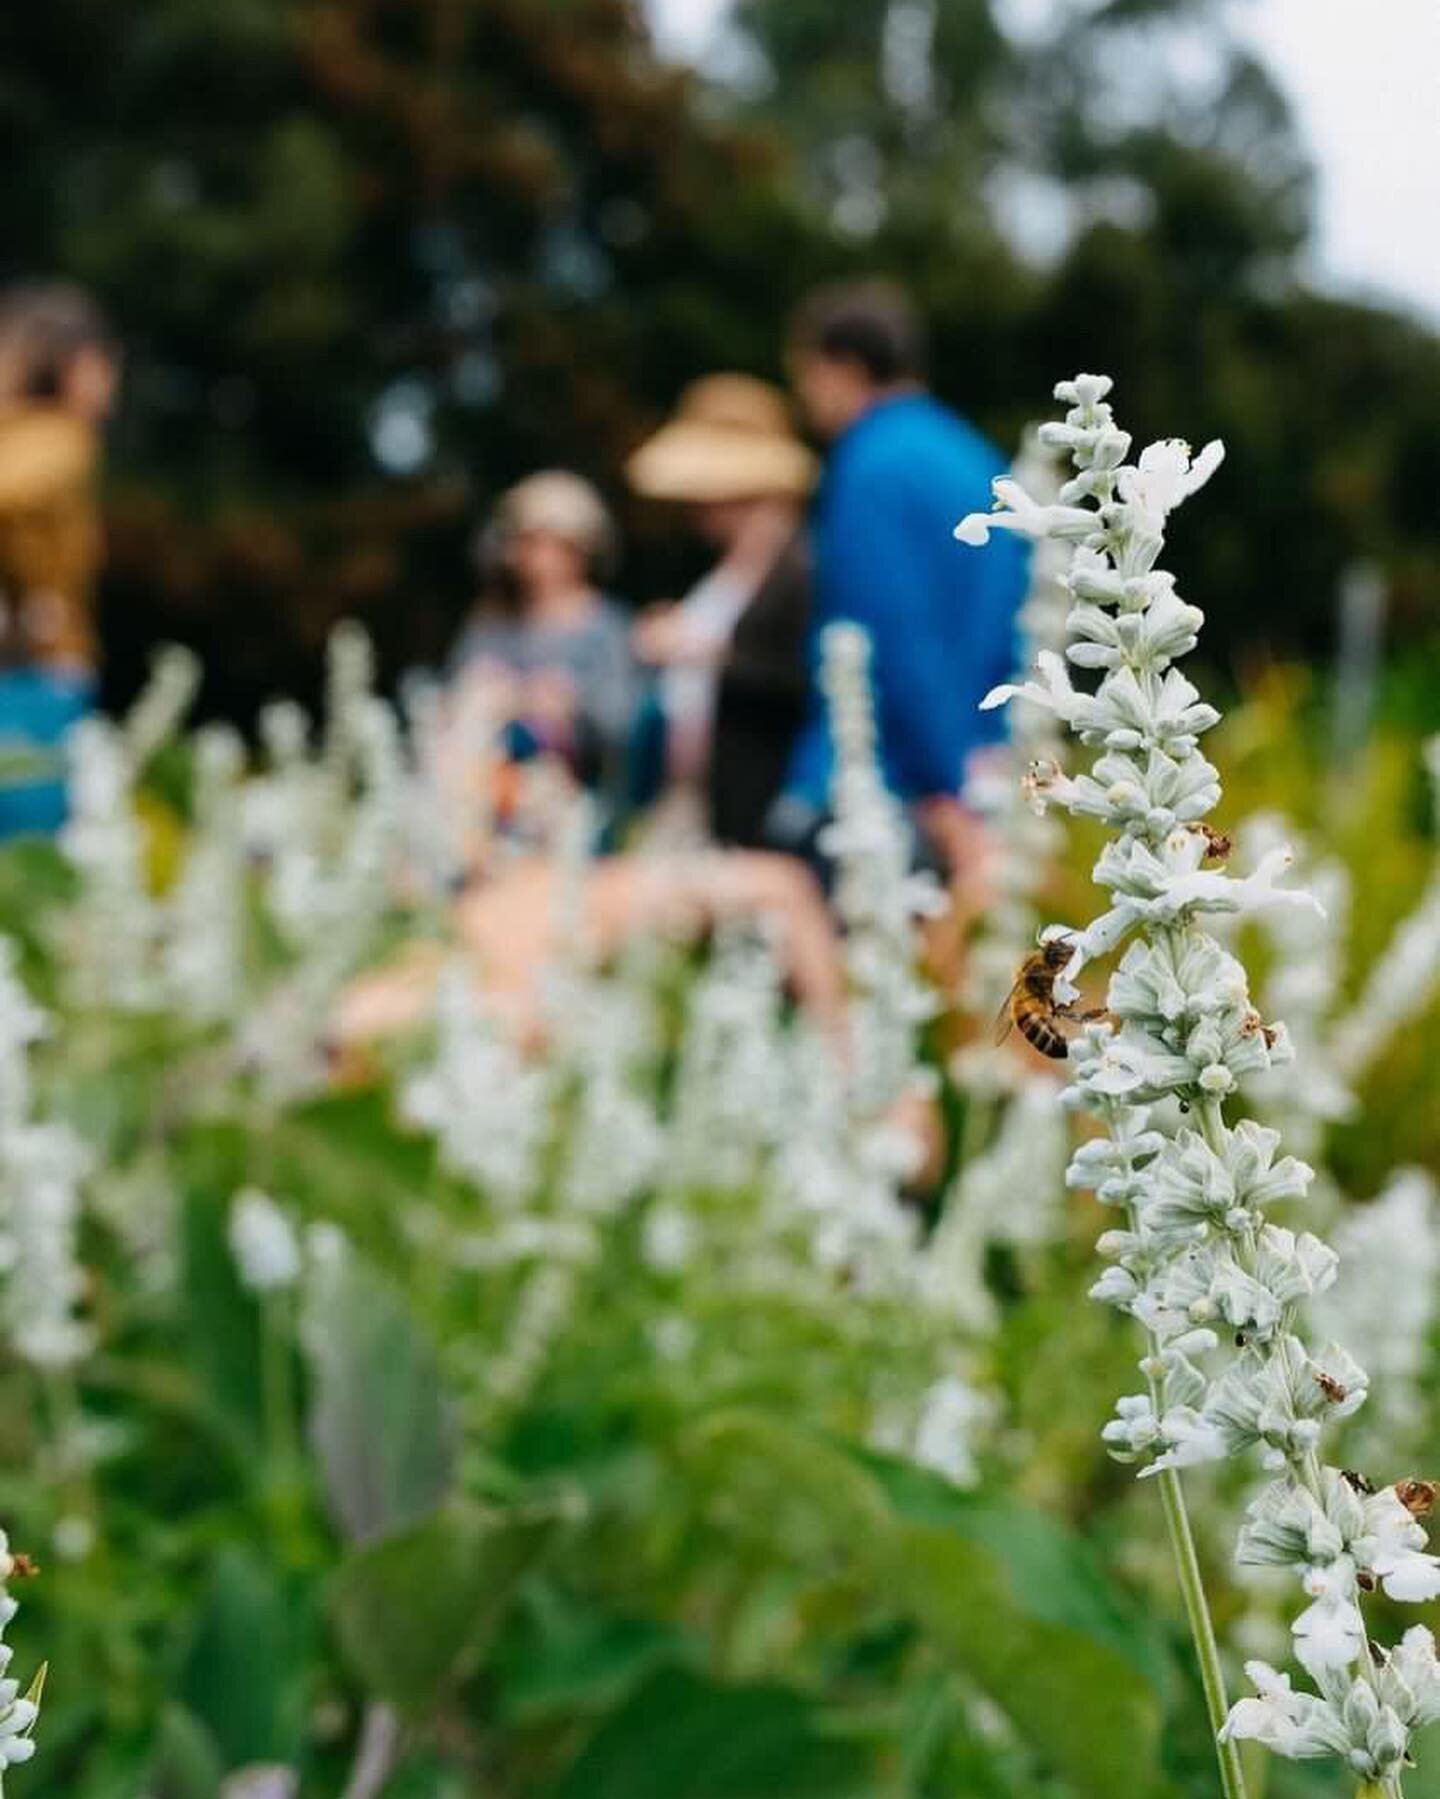 Ryan and I recently attended a personalised Introduction to Herbalism workshop with Tamara @fromthesoilherbal. We learnt foraging fundamentals including how to spot and harvest common medicinal weeds and plants,  herbal processing and preparations of